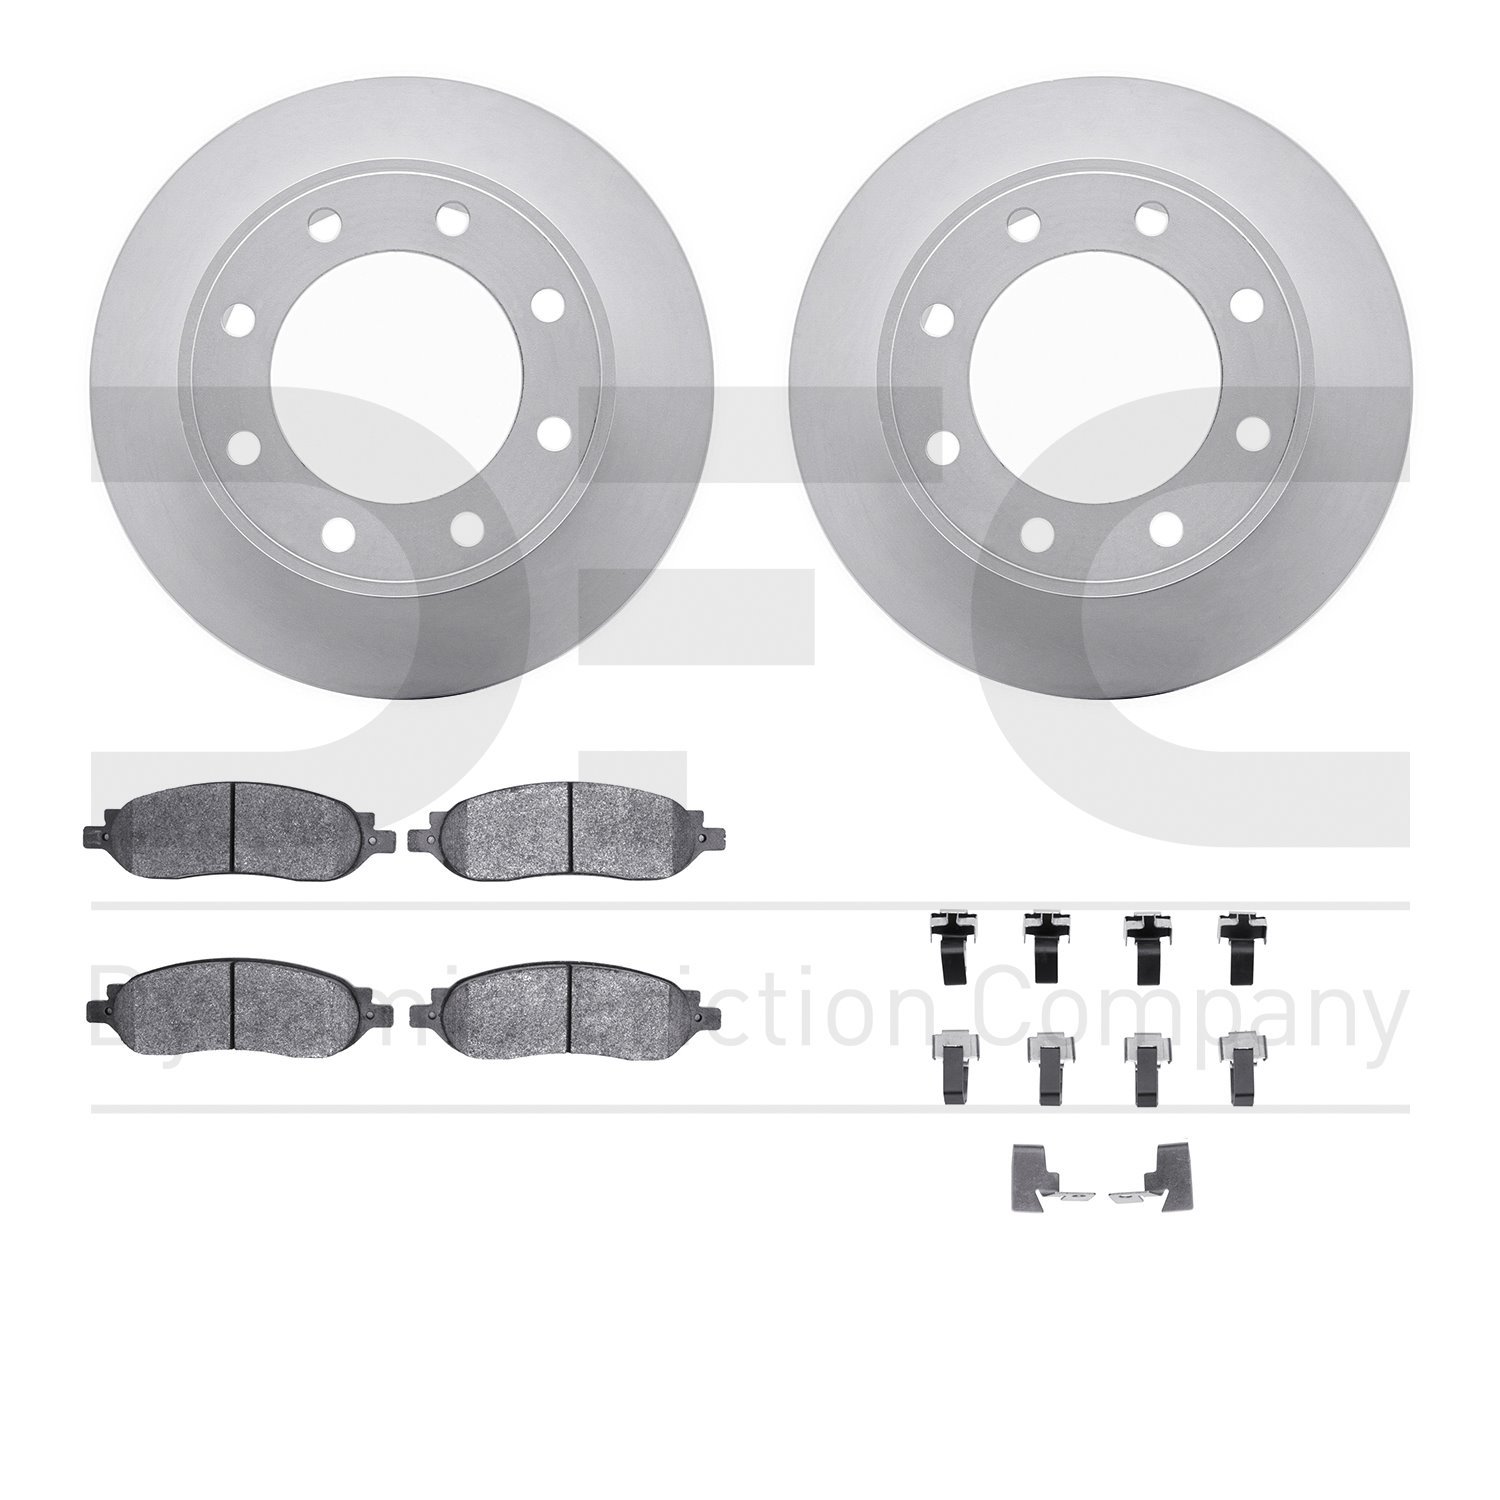 4412-54057 Geospec Brake Rotors with Ultimate-Duty Brake Pads & Hardware, 2005-2007 Ford/Lincoln/Mercury/Mazda, Position: Rear